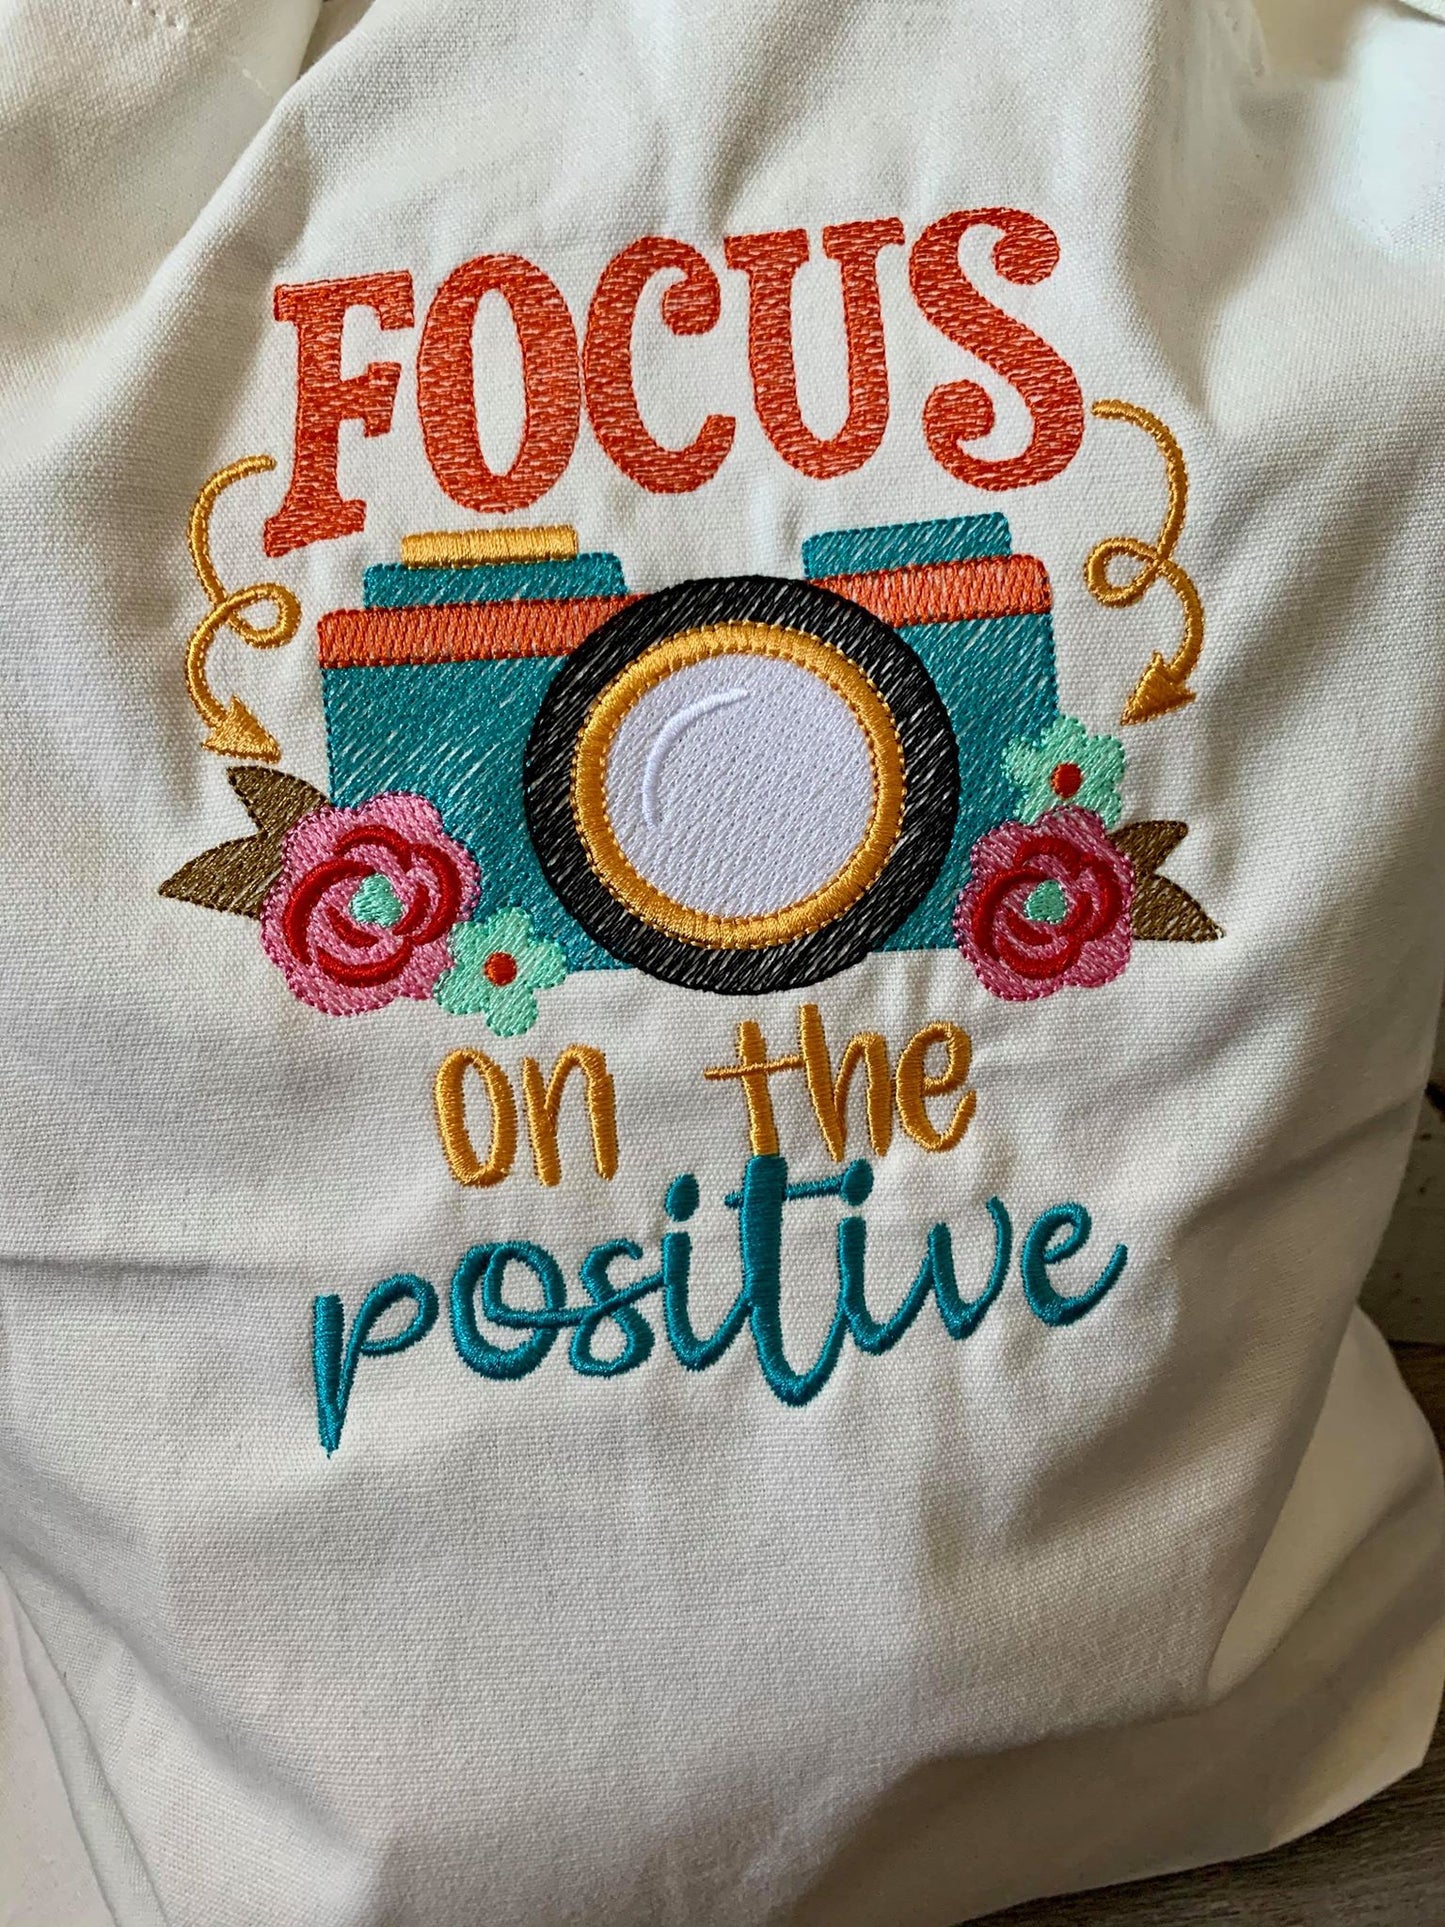 Focus on the positive - 3 Sizes - Digital Embroidery Design